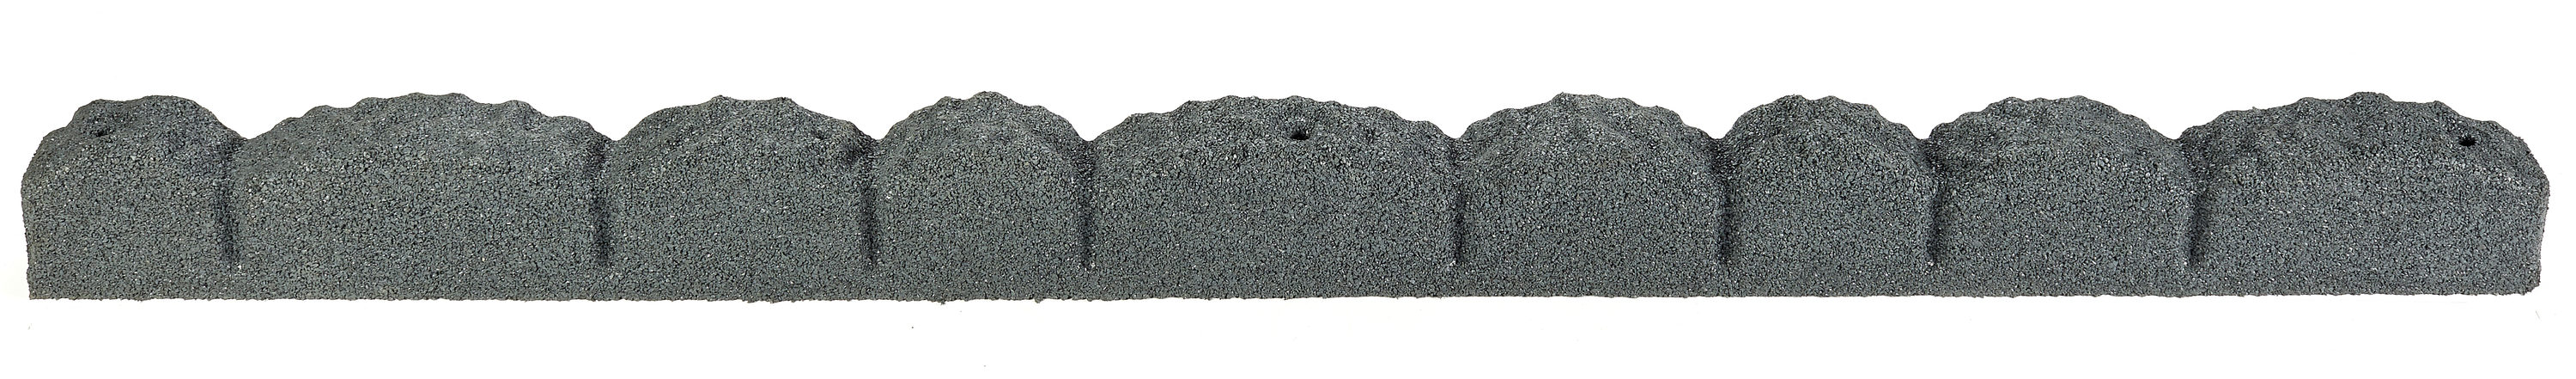 4-ft x 3-in Cobblestone Gray Rubber Landscape Edging Section | - Rubberific RCSE4GY